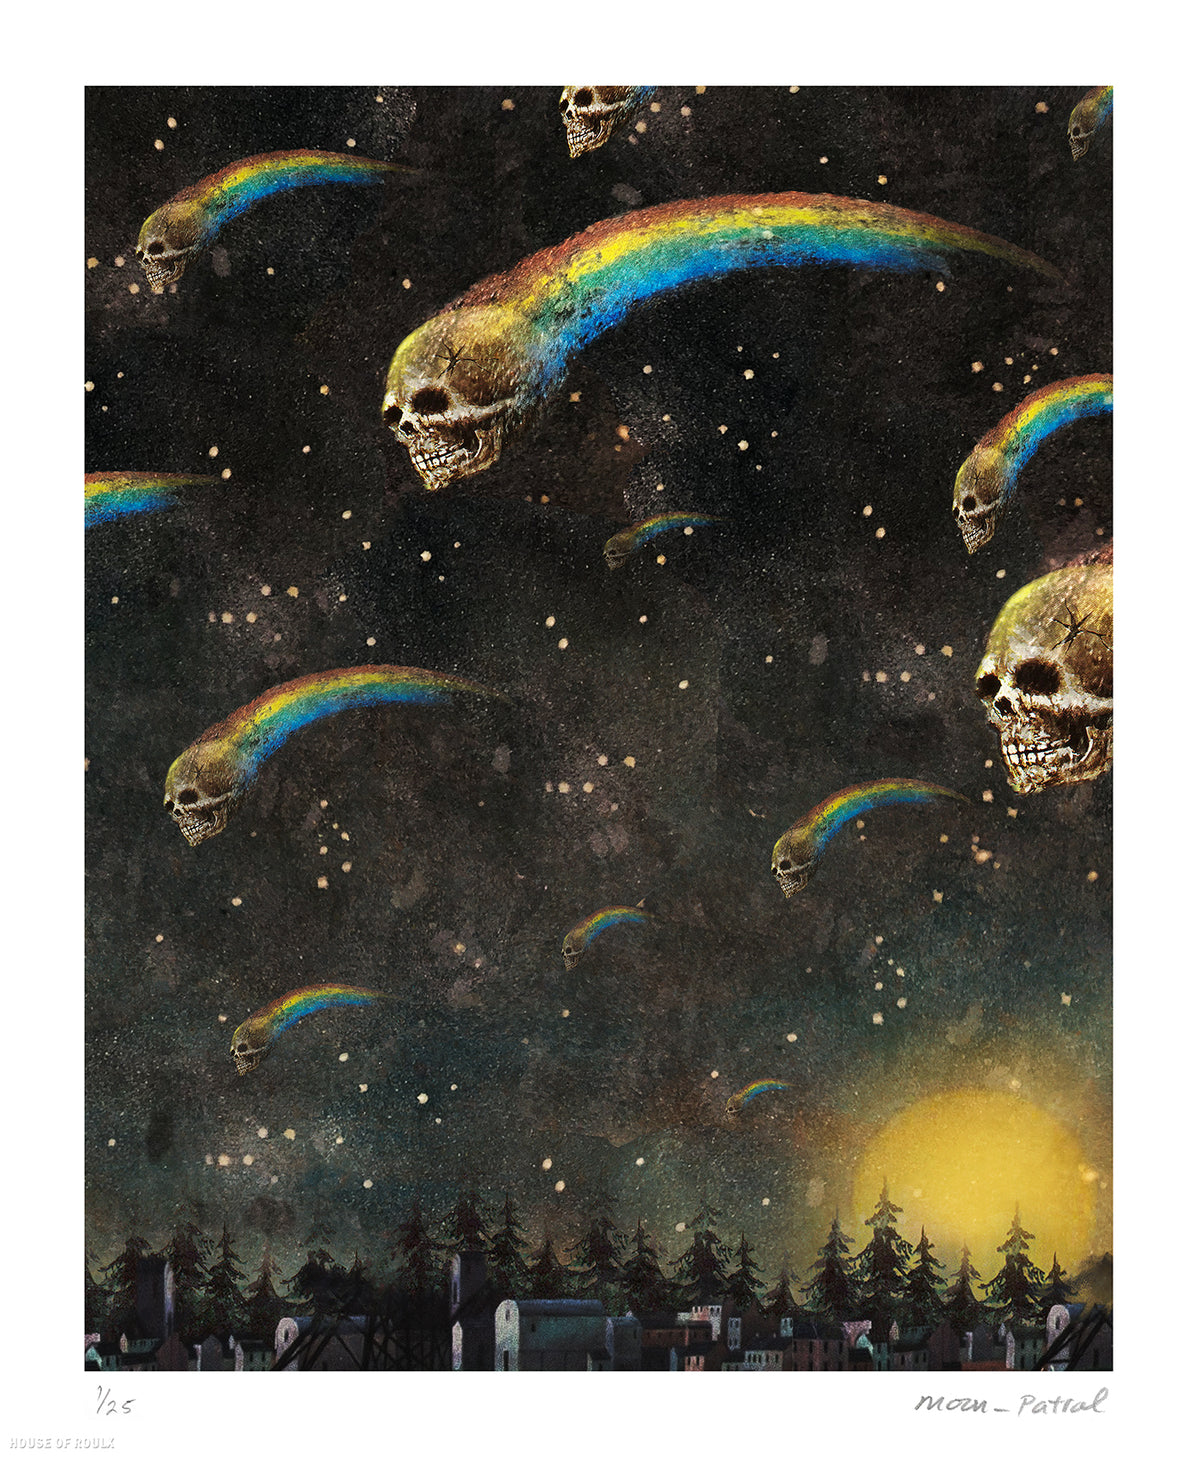 Moon Patrol &quot;Night of the Comets&quot; - Archival Print, Limited Edition of 25 - 14 x 17&quot;